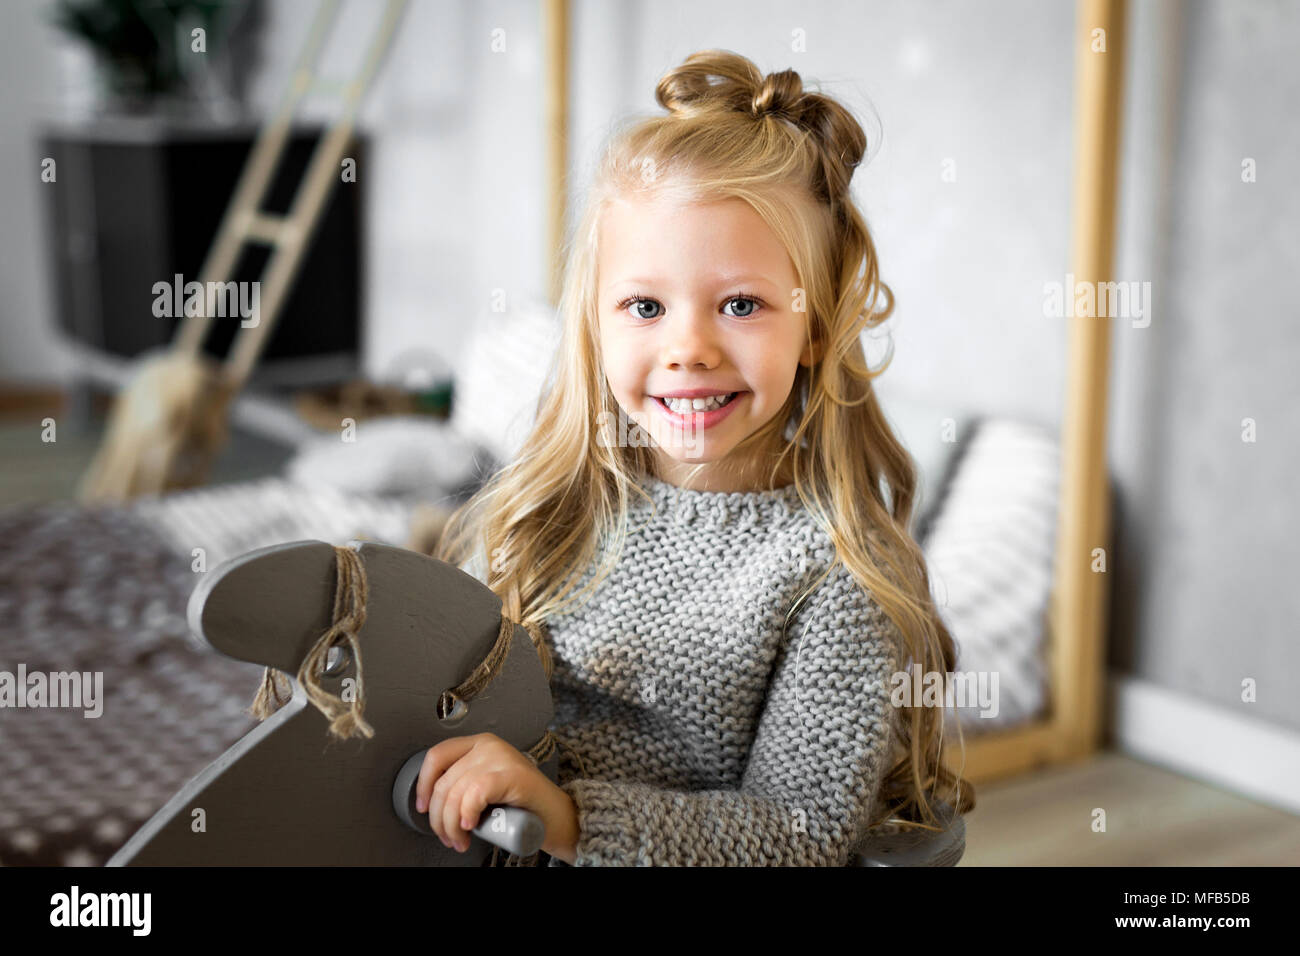 Cute little girl riding a toy horse. Stock Photo